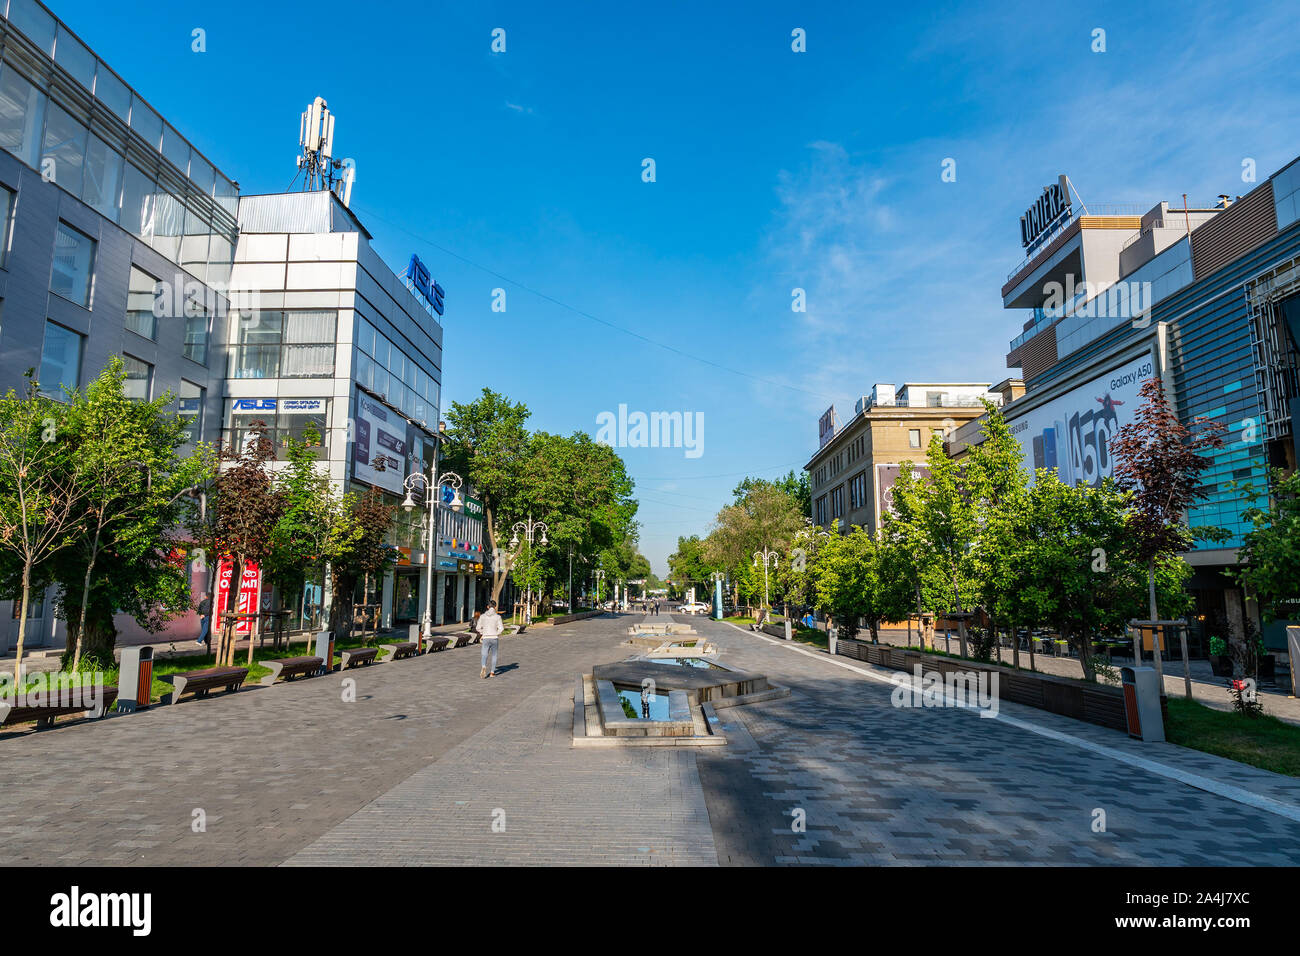 Almaty Zhibek Zholy Walking Street with Closed Stores Shops and Few People Early in the Morning During Sunrise Stock Photo